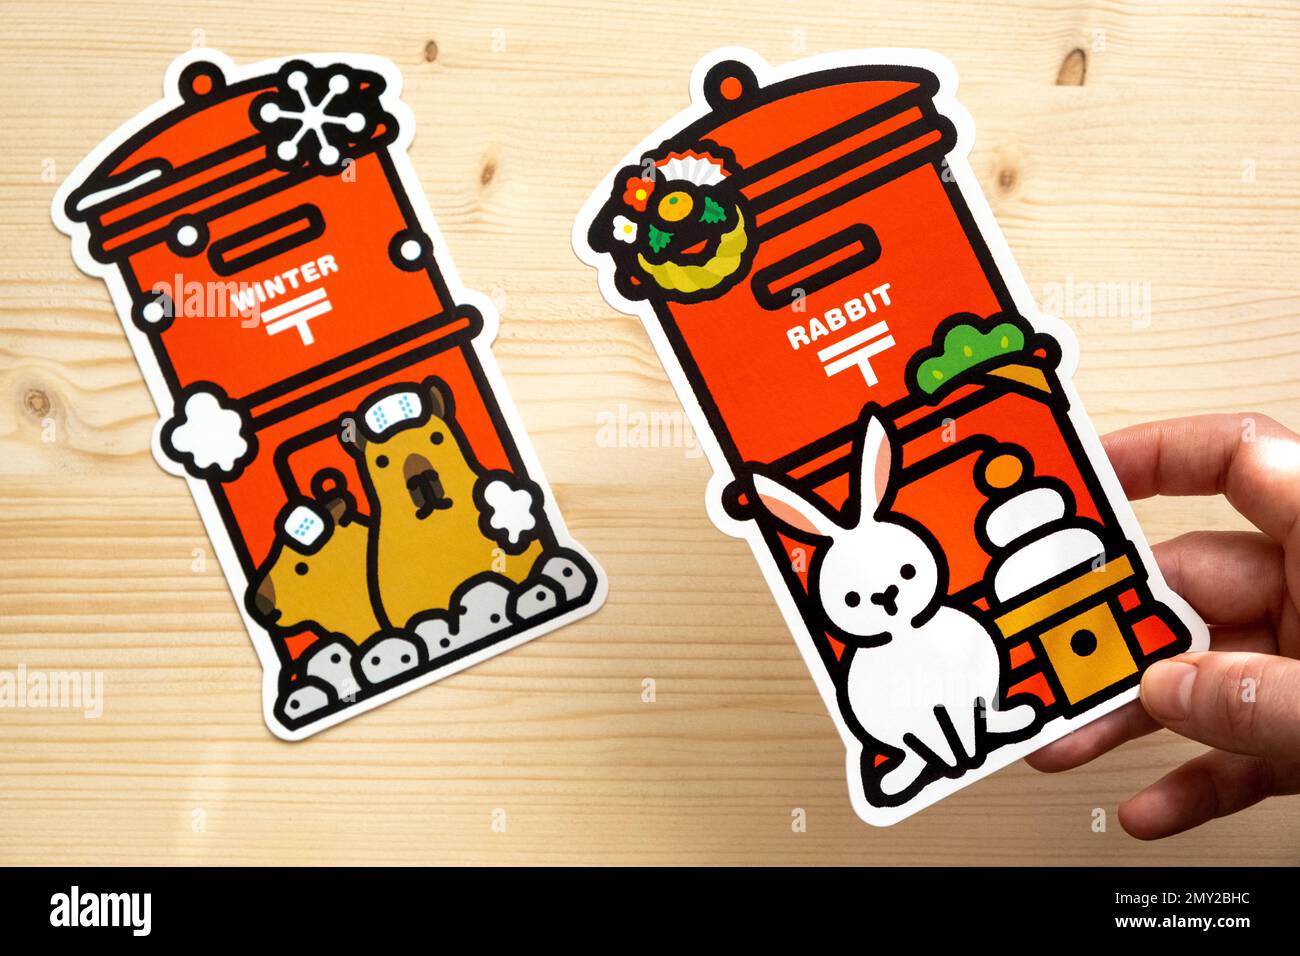 Gotochi Postcard, Gotochi Postcards, Gotochi Mailbox, Japanese Postcard, Red Mailboxes, Japan Post Red Mailbox, 日本郵便, Year of the Rabbit, Postbox Stock Photo